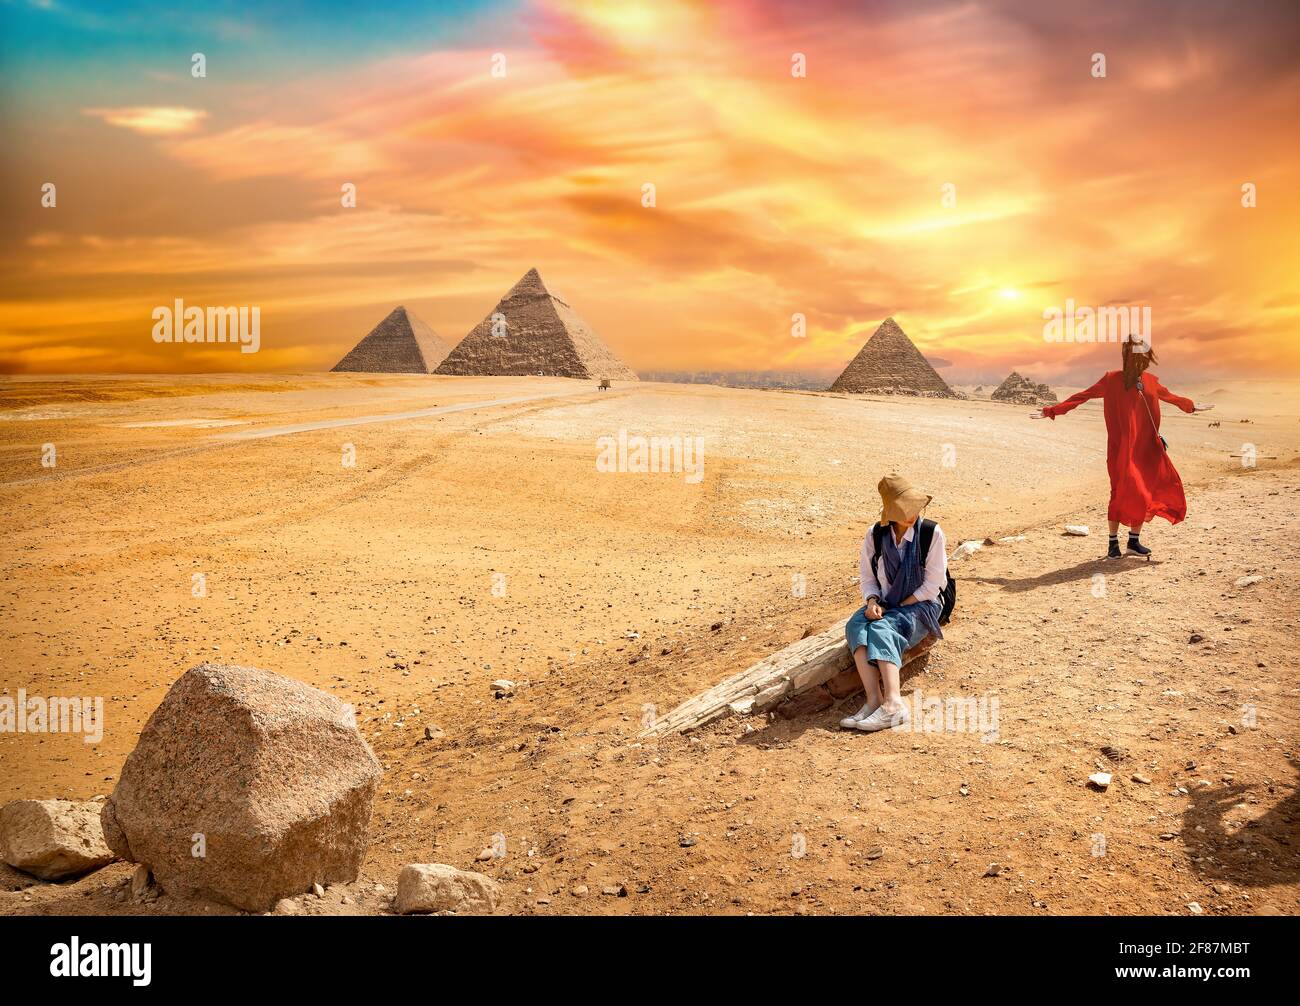 Tour near the egyptian pyramids at colorful sunset Stock Photo